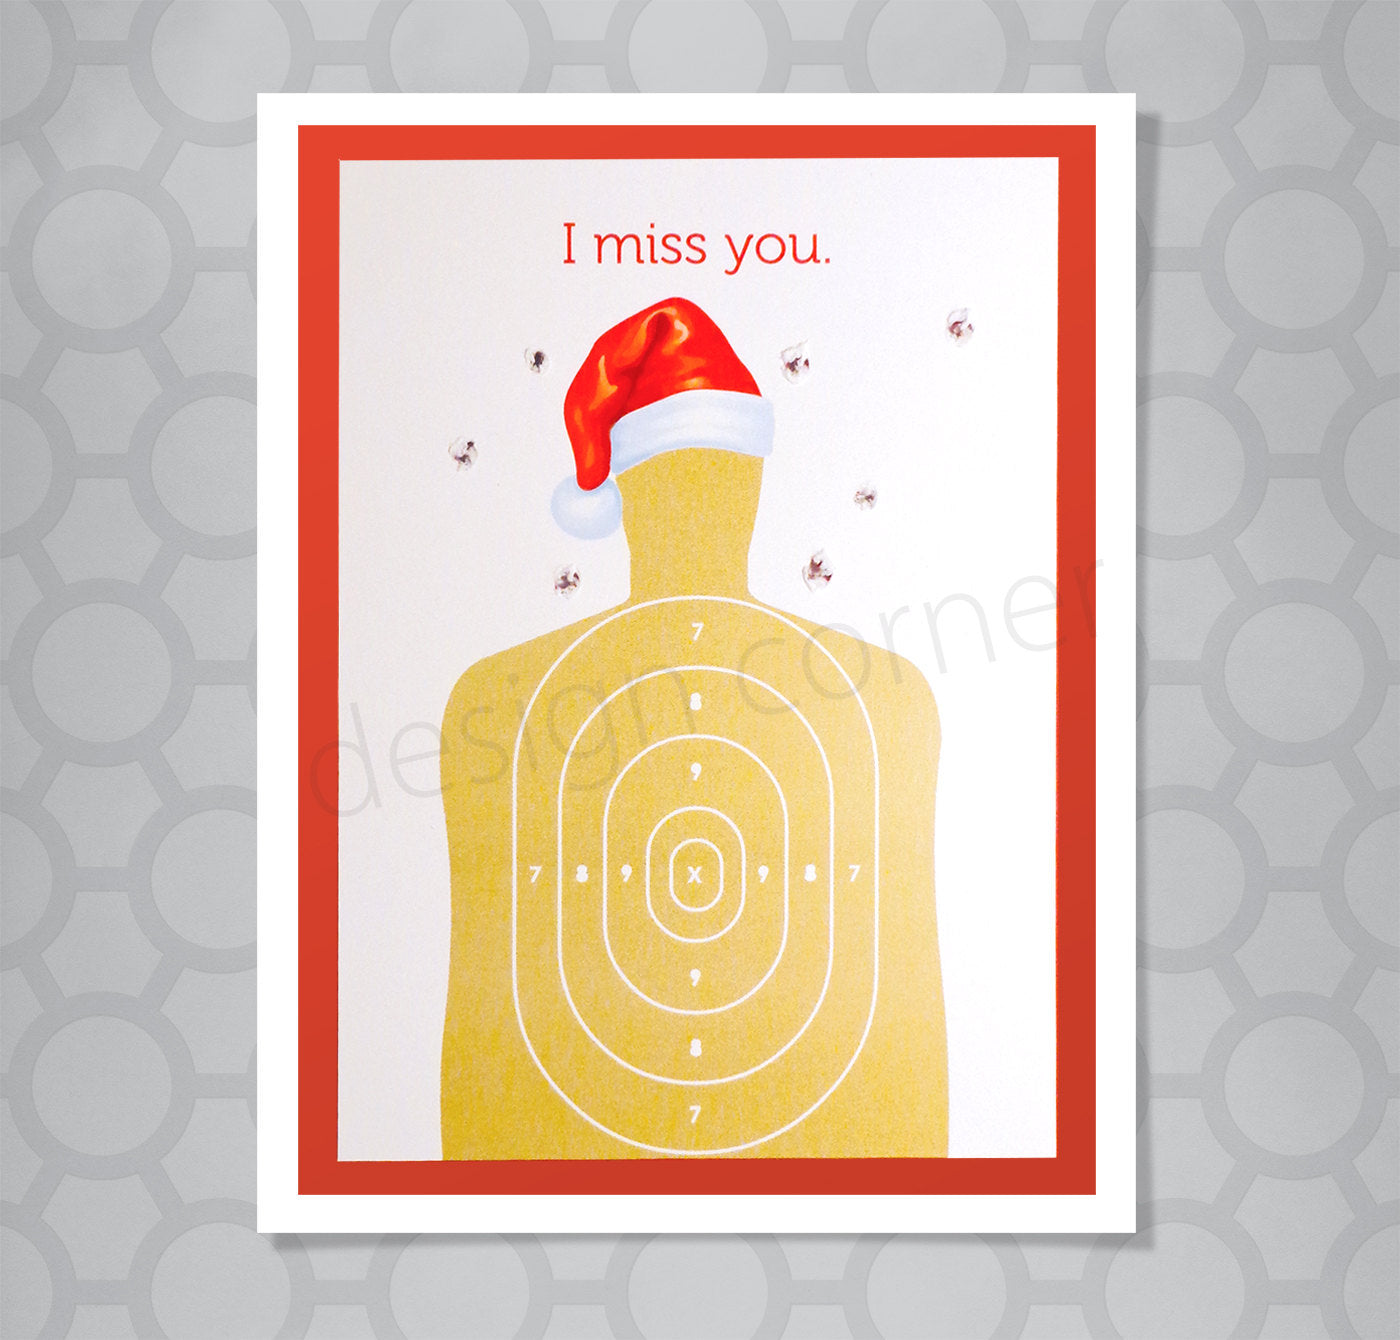 Image of target practice person on greeting card with holes punched around it and caption I miss you.